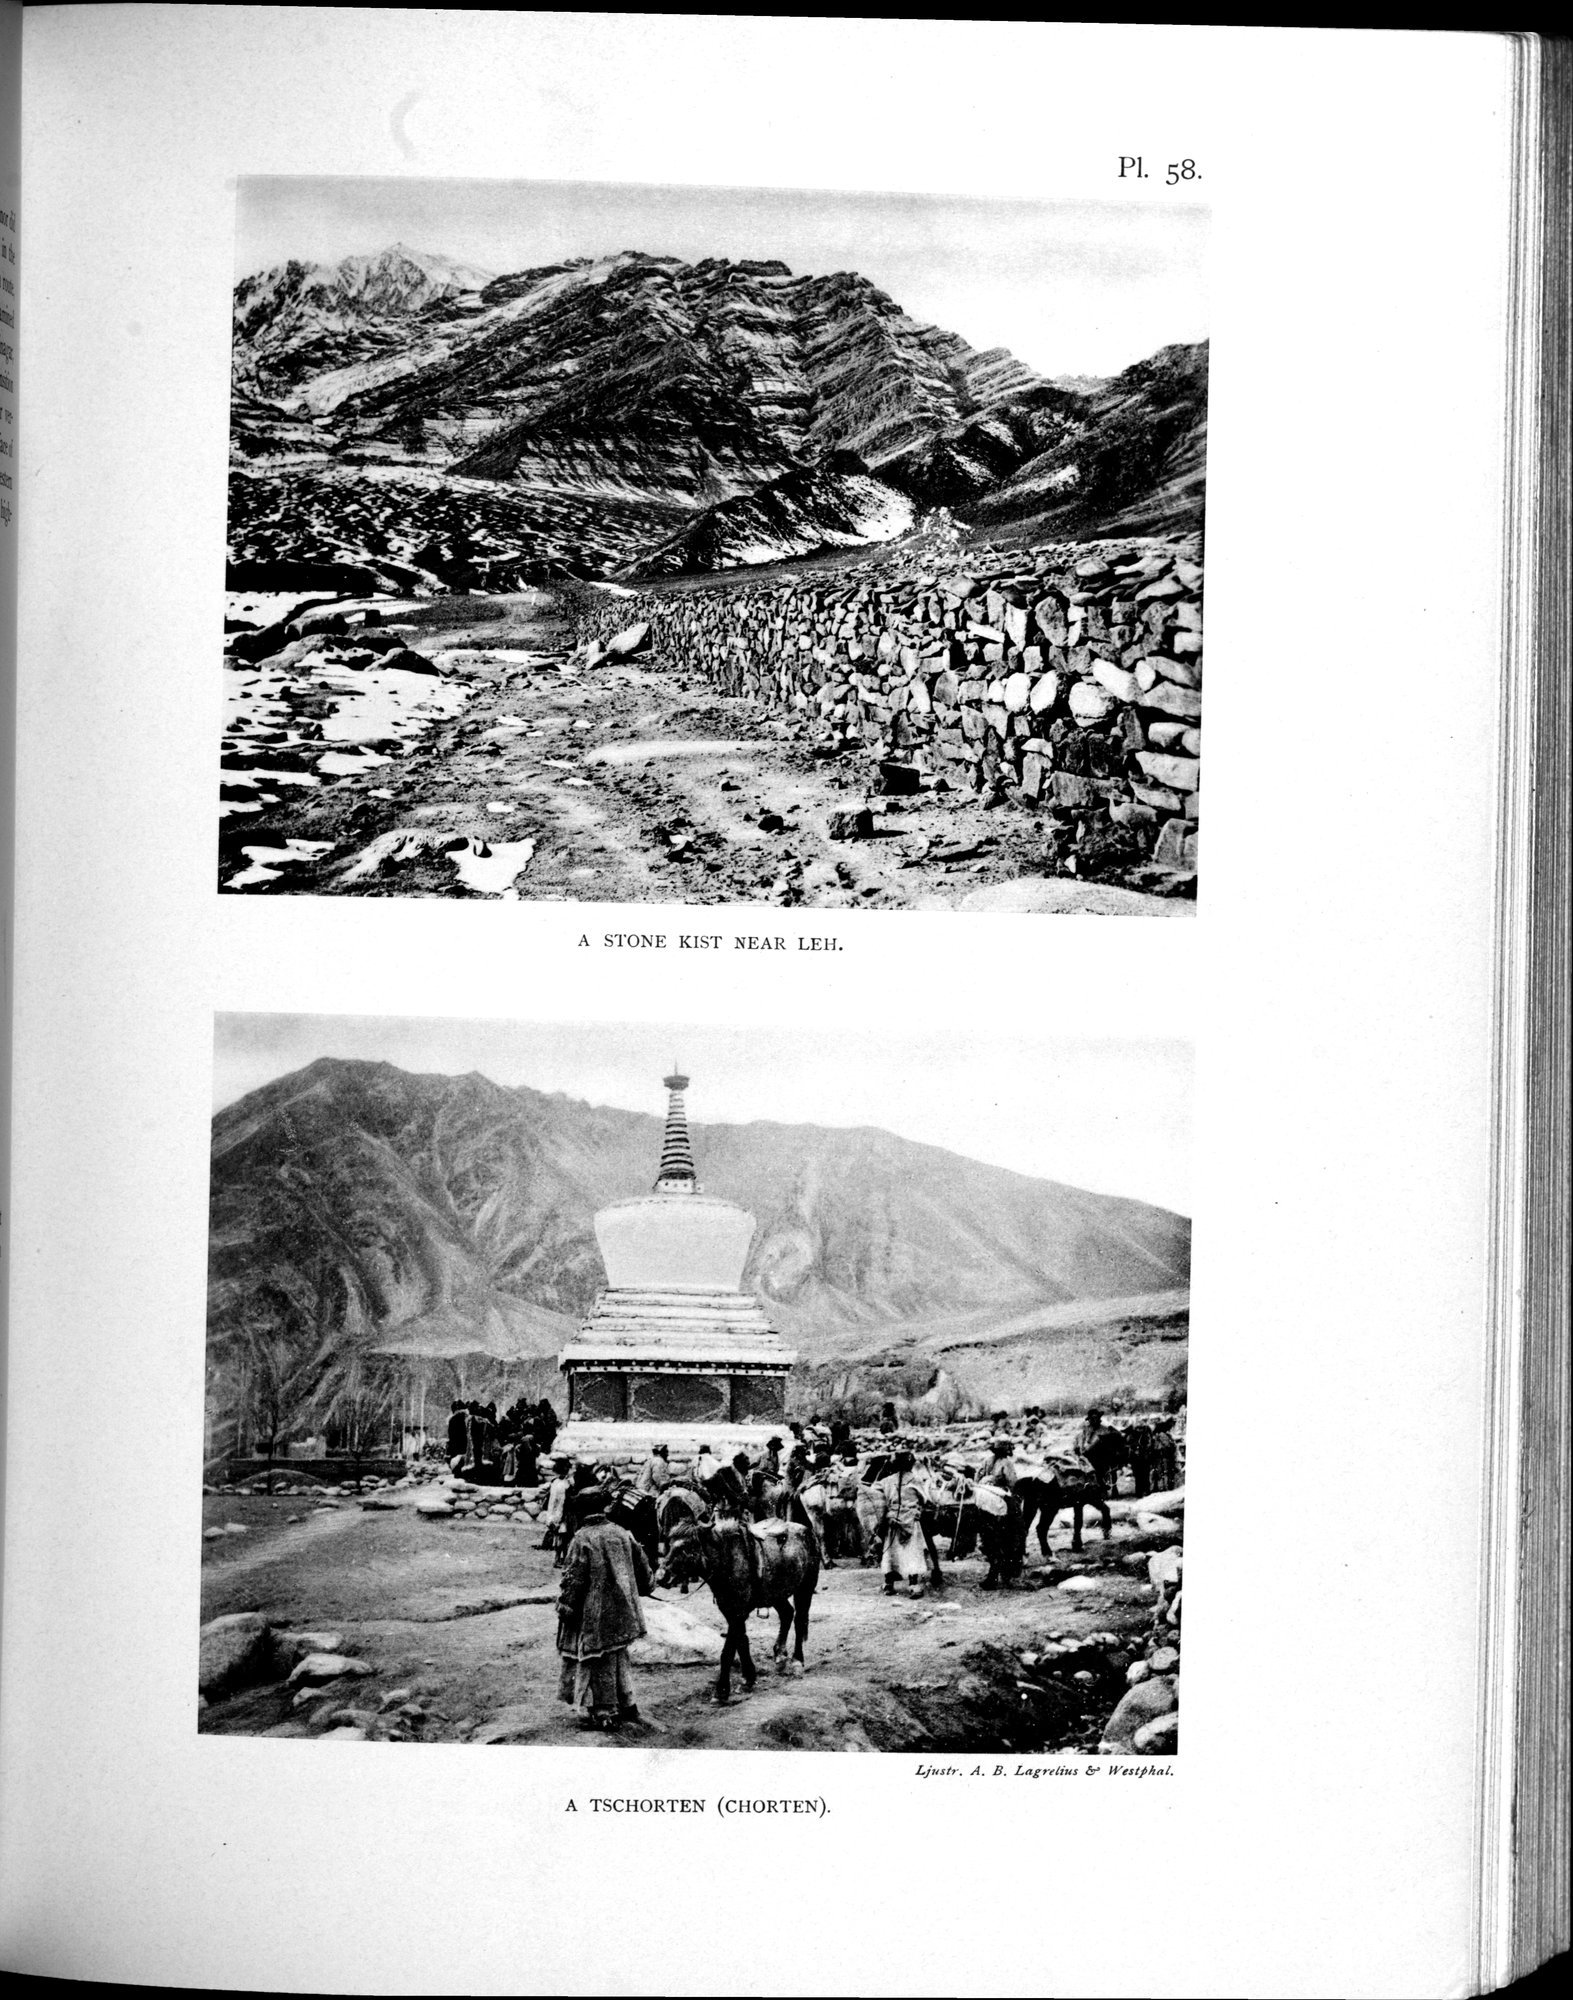 Scientific Results of a Journey in Central Asia, 1899-1902 : vol.4 / 511 ページ（白黒高解像度画像）